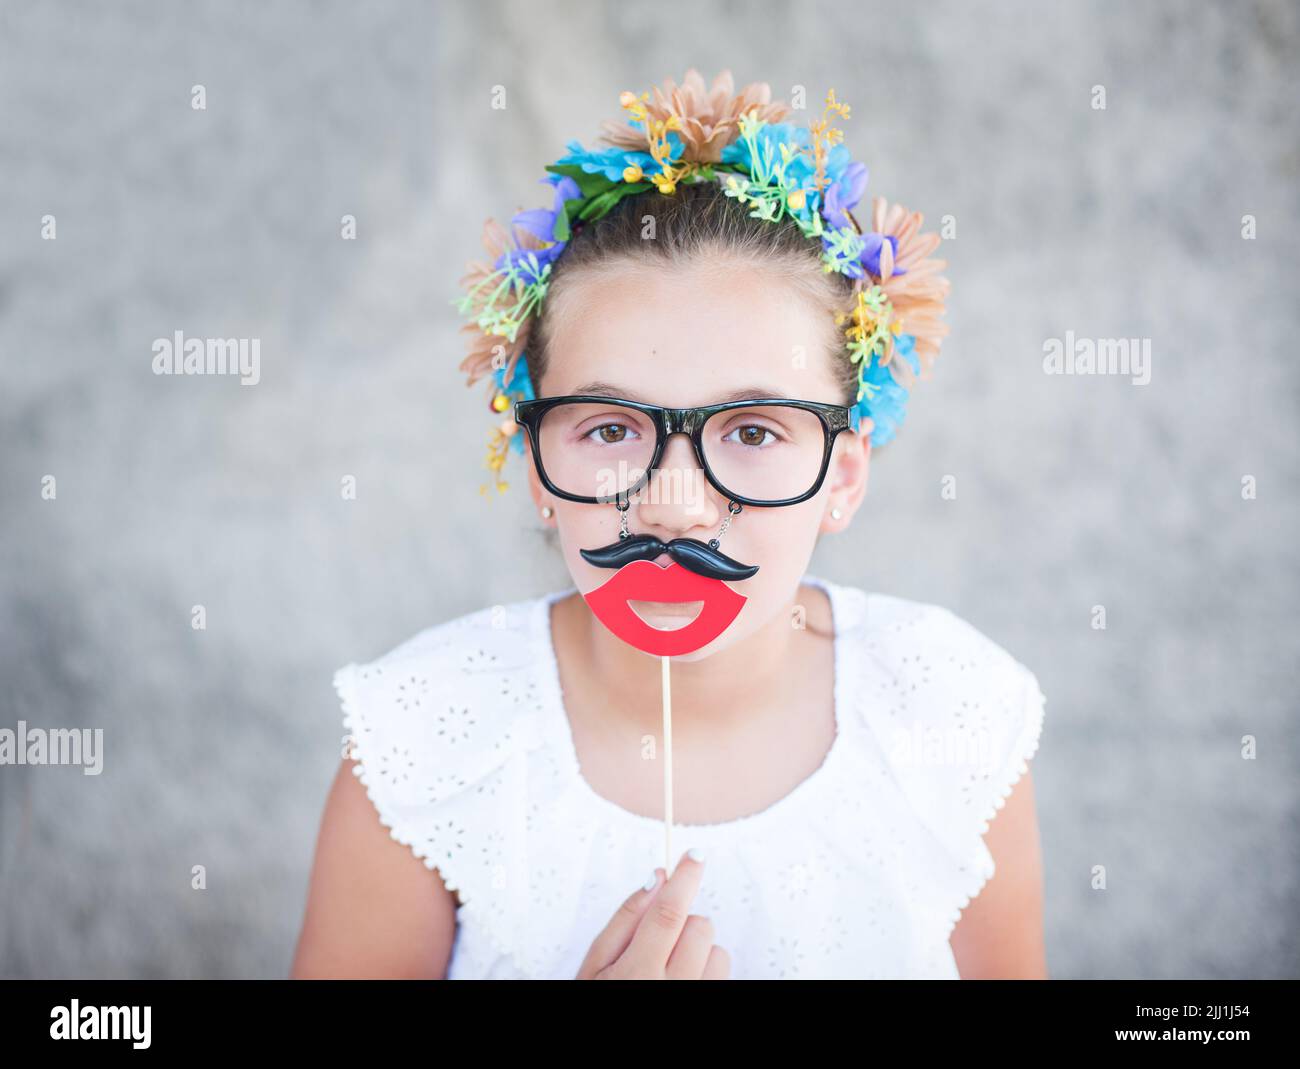 Beautiful girl with Santa beard and mustache prop or mask. Stock Photo